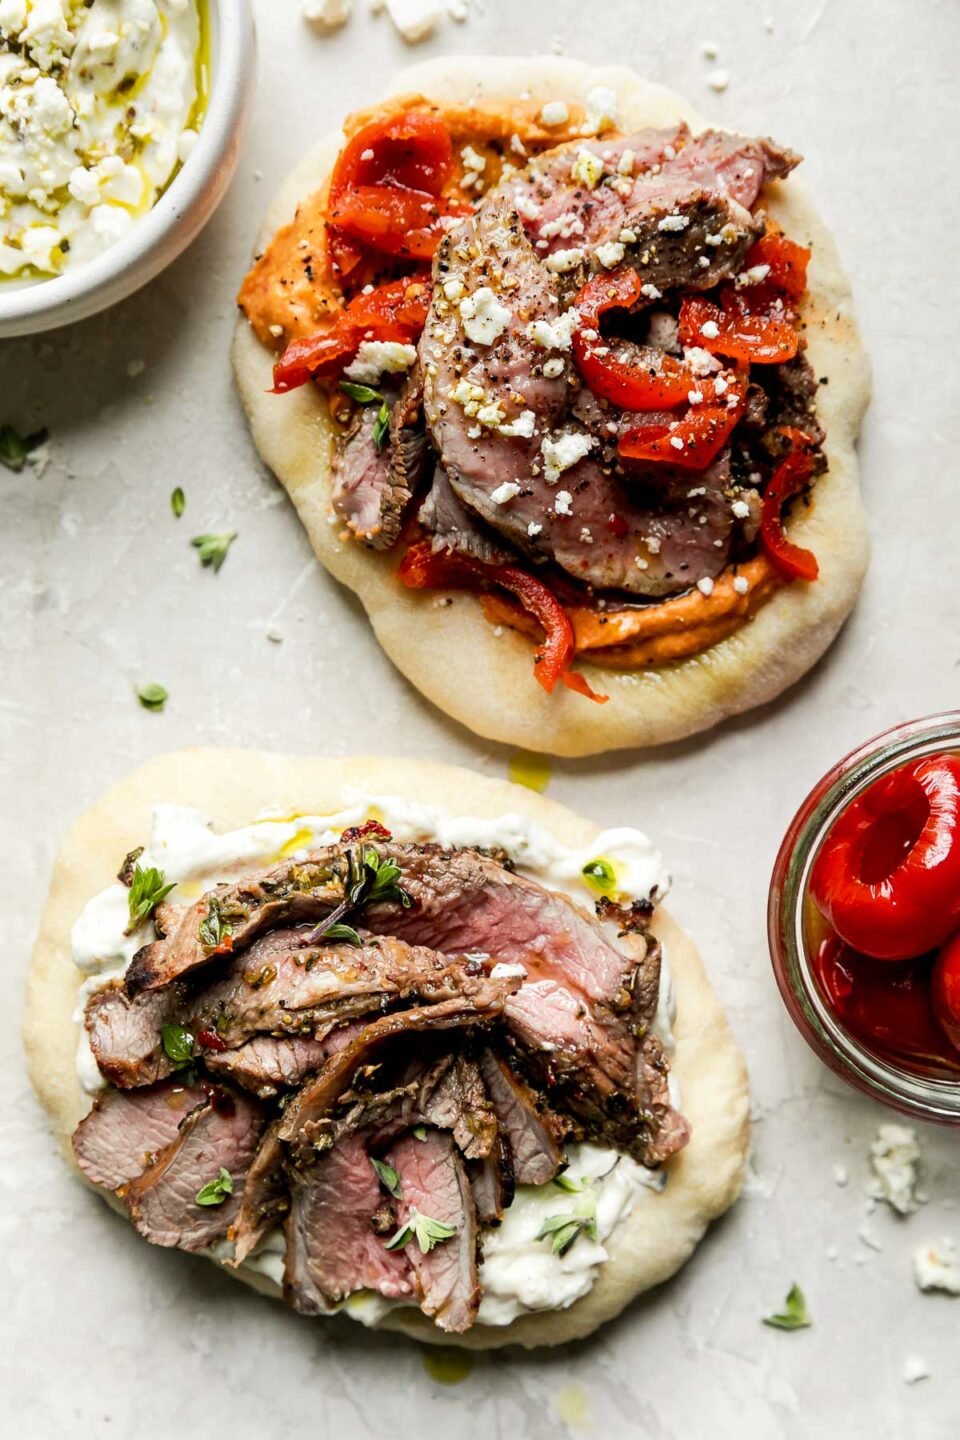 Two small pieces of pita bread are topped with hummus and a Greek yogurt dipped then topped with thinly sliced grilled boneless leg of lamb and other thinly sliced veggies. The two pitas sit atop a creamy white textured surface alongside a small glass jar filled with roasted red peppers and a small white ceramic bowl filled with a Greek-yogurt based dip.